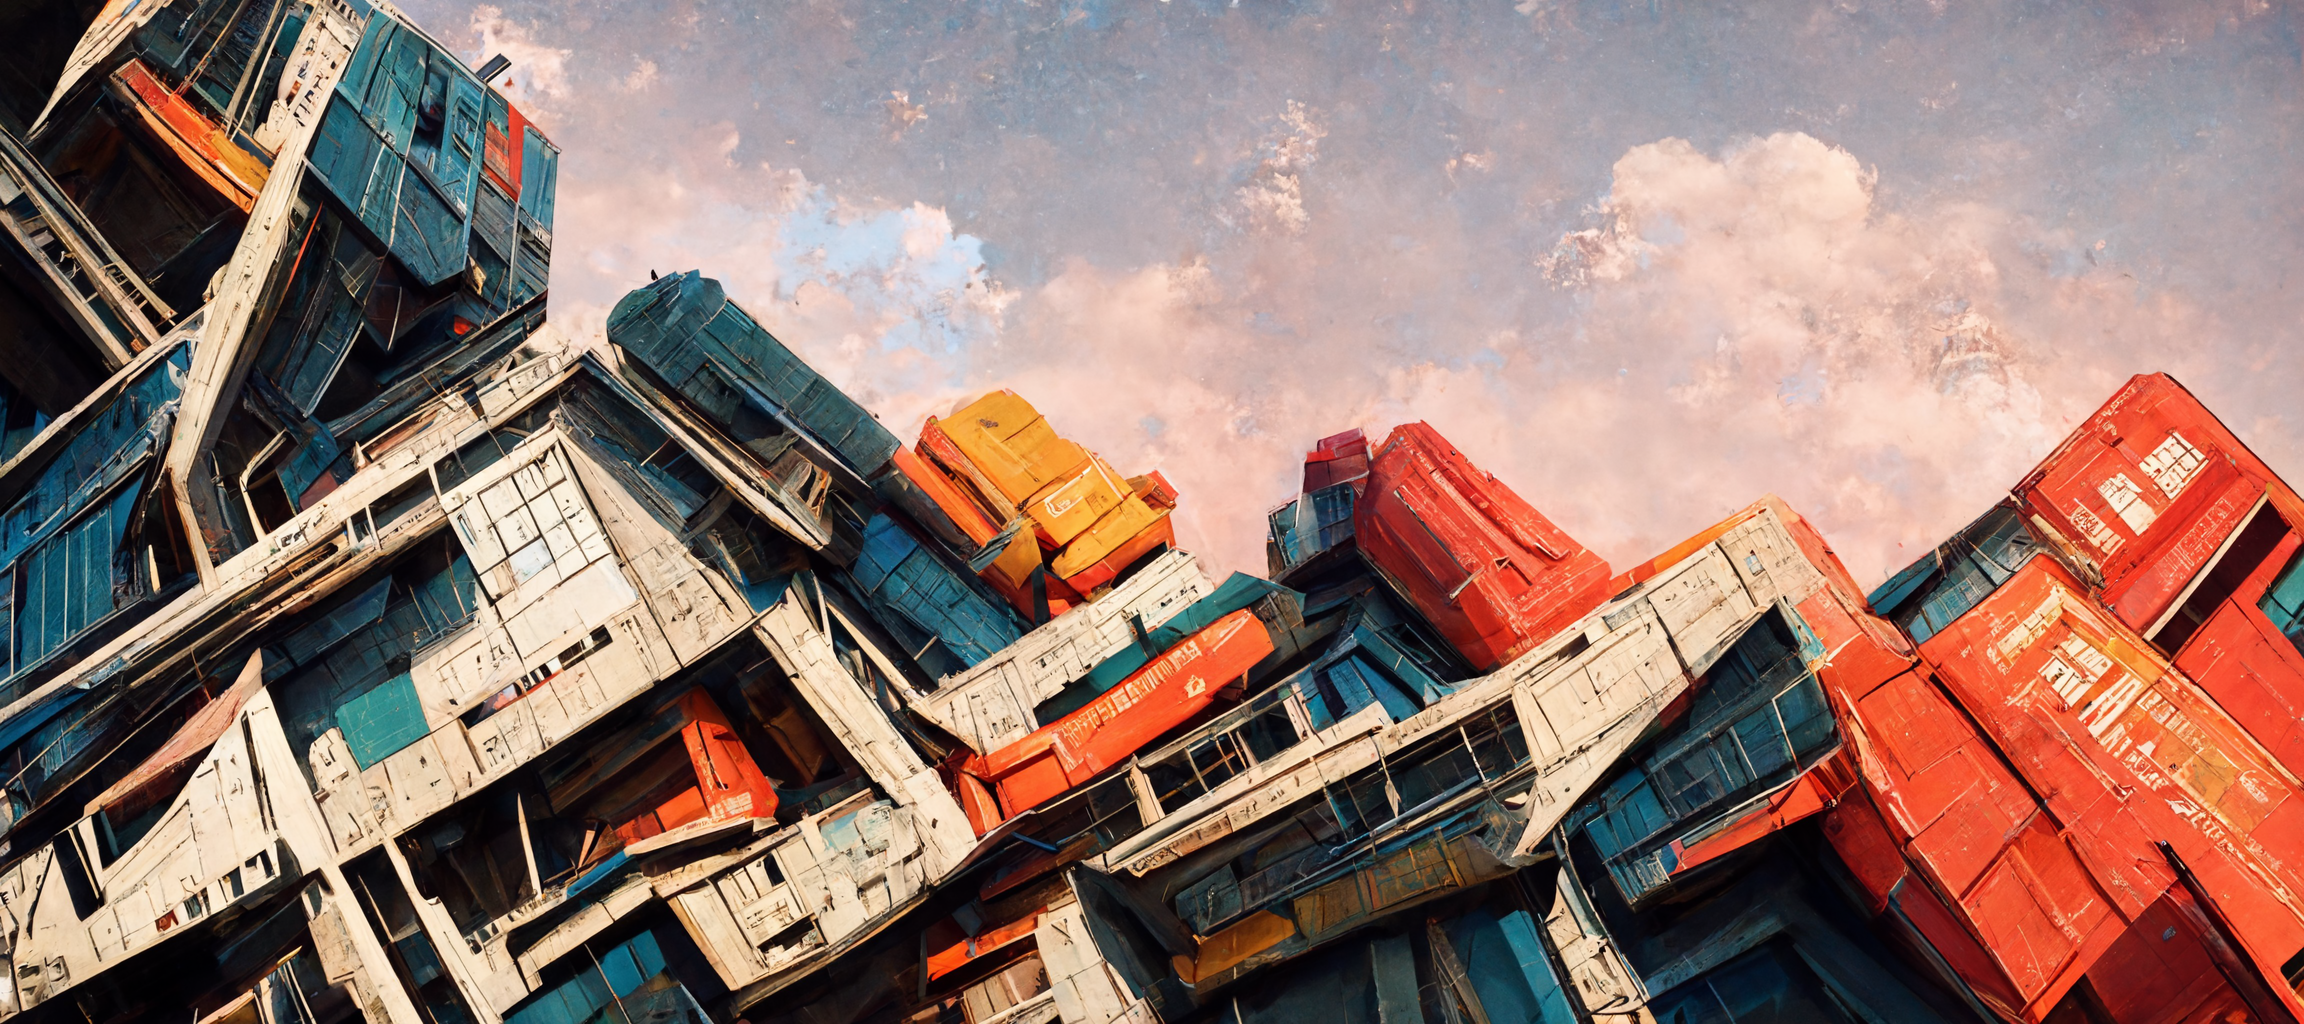 vibe_huge_pile_of_giant_sneakers_towering_over_a_town_photoreal_1f3e2ac0-4f0b-4740-95a1-98b7eb8190ad